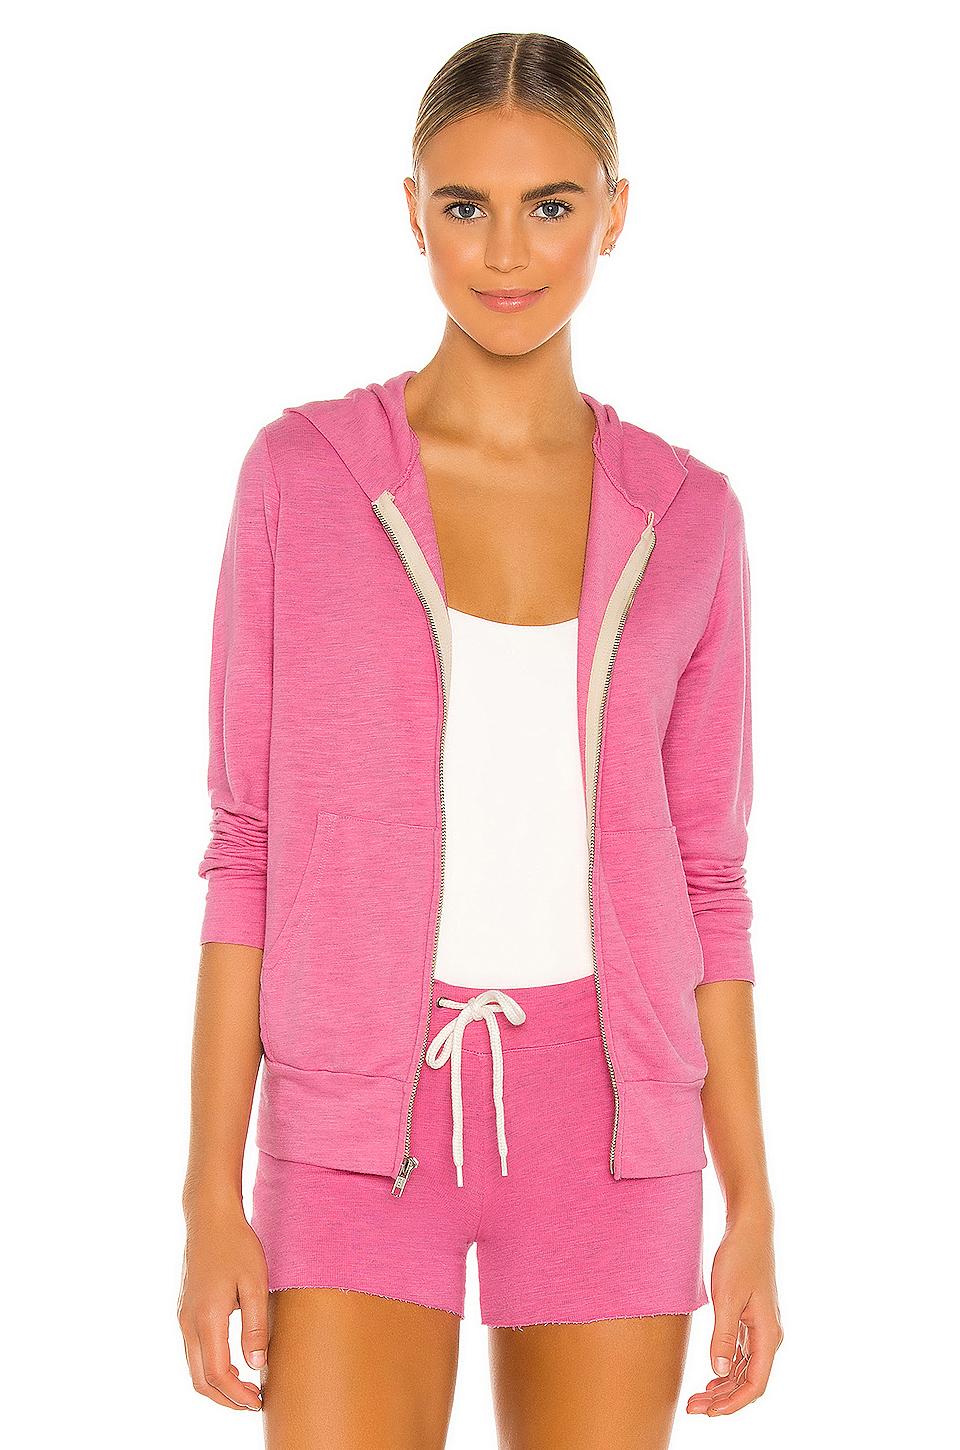 Monrow Cotton Supersoft Zip Up Hoodie in Hot Pink (Pink) - Lyst